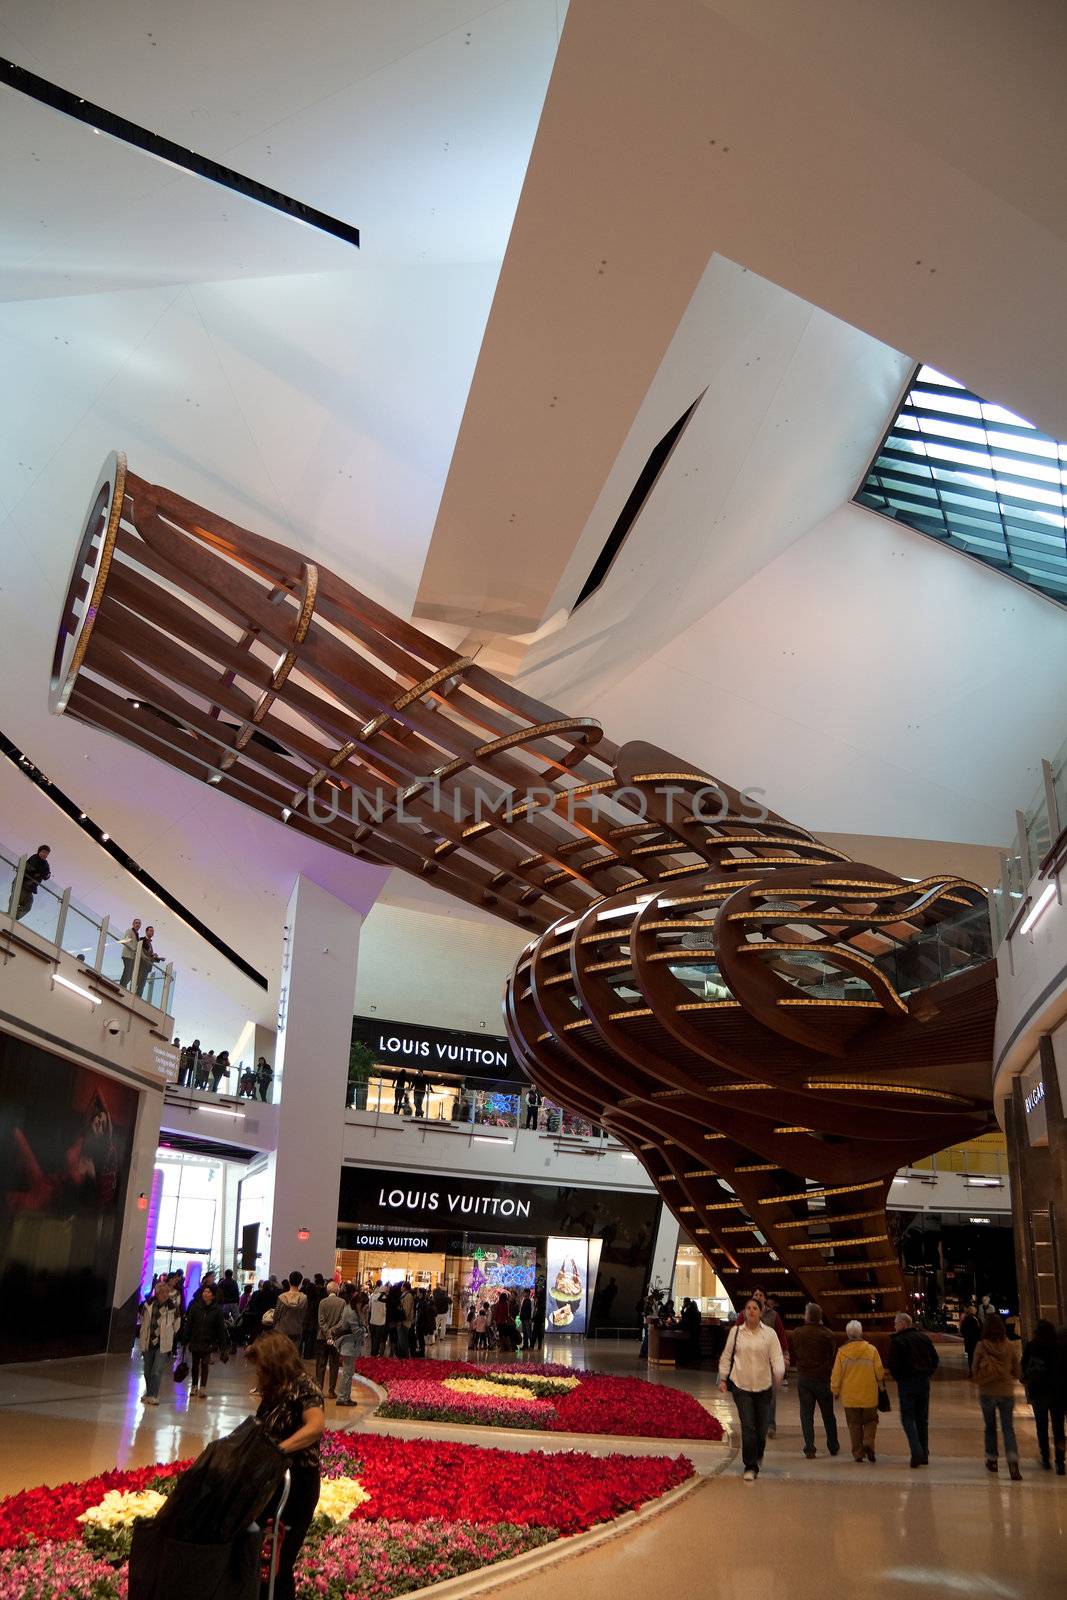 December 30th, 2009 - Las Vegas, Nevada, USA - The Crystals shopping mall at City Center by Daniel Libeskind.  The wooden structure was one of the main features of the mall and is located by the flagship Louis Vuitton store.